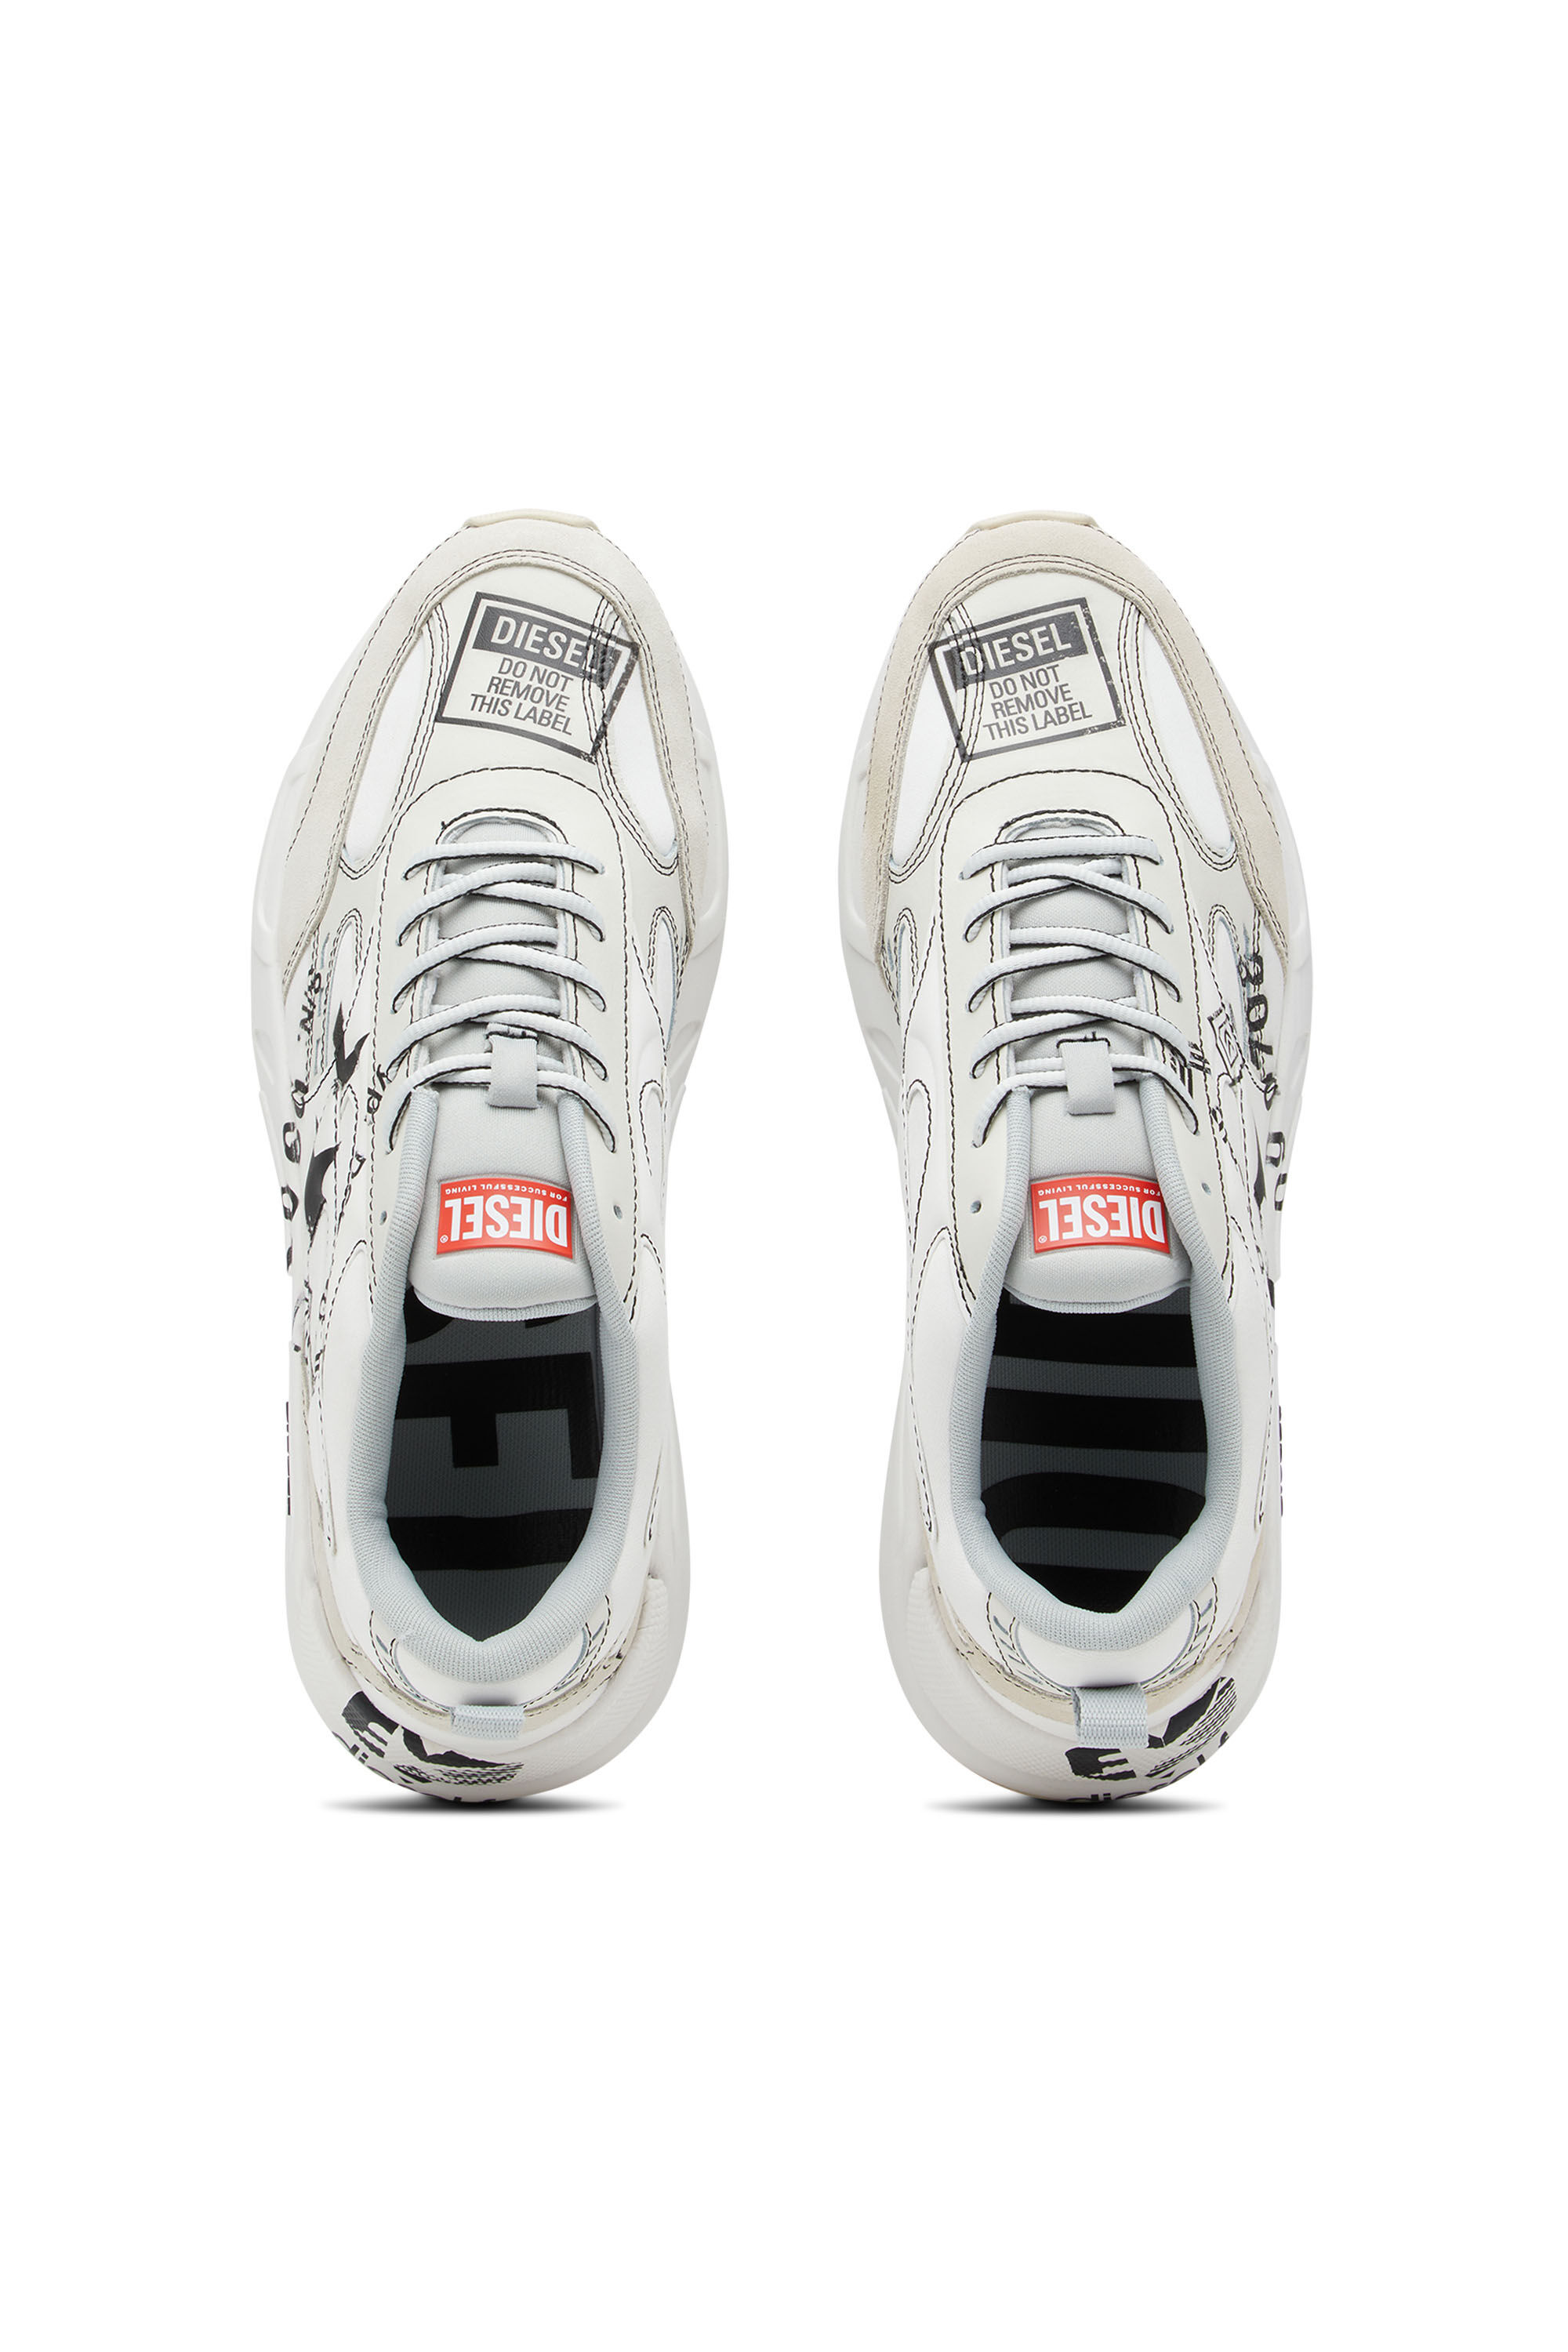 S-SERENDIPITY SPORT Man: Sneakers with graphic logo prints | Diesel